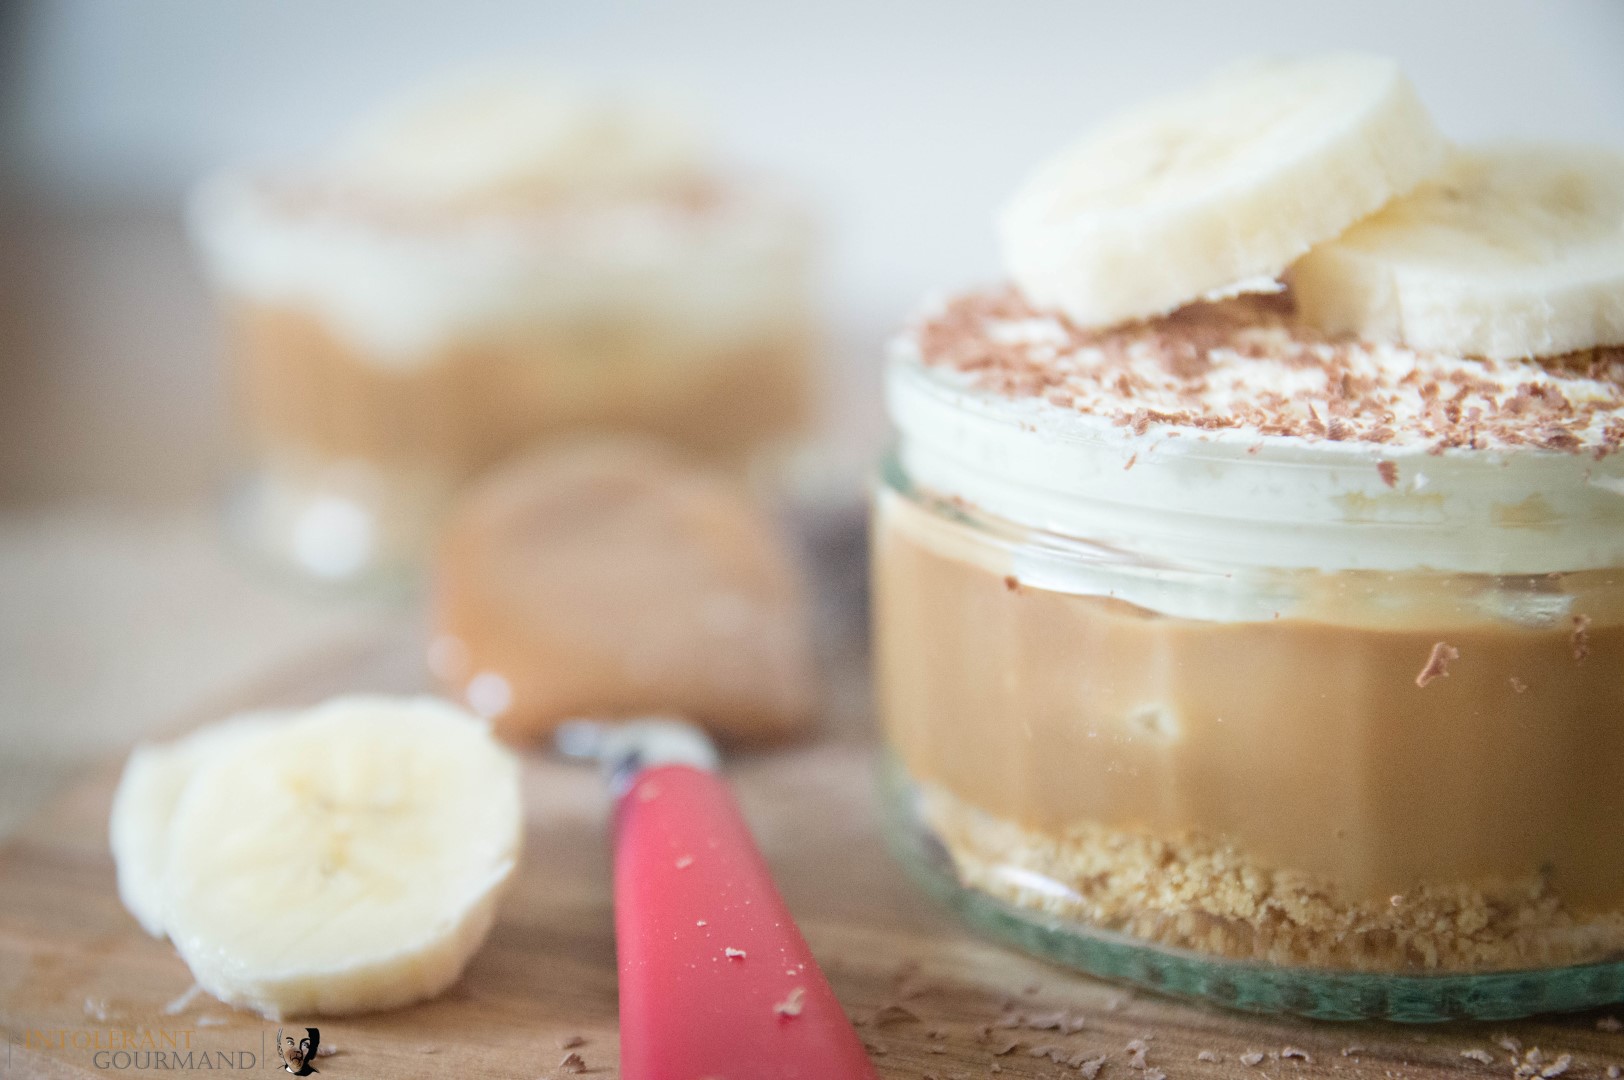 Vegan & Gluten-Free Banoffee Pie - dairy-free, gluten-free, egg-free, nut-free and delicious! Made with a crumbly base, a creamy centre, and topped with decadent caramel style sauce! Who says allergies have to stop you eating delicious food! www.intolerantgourmand.com